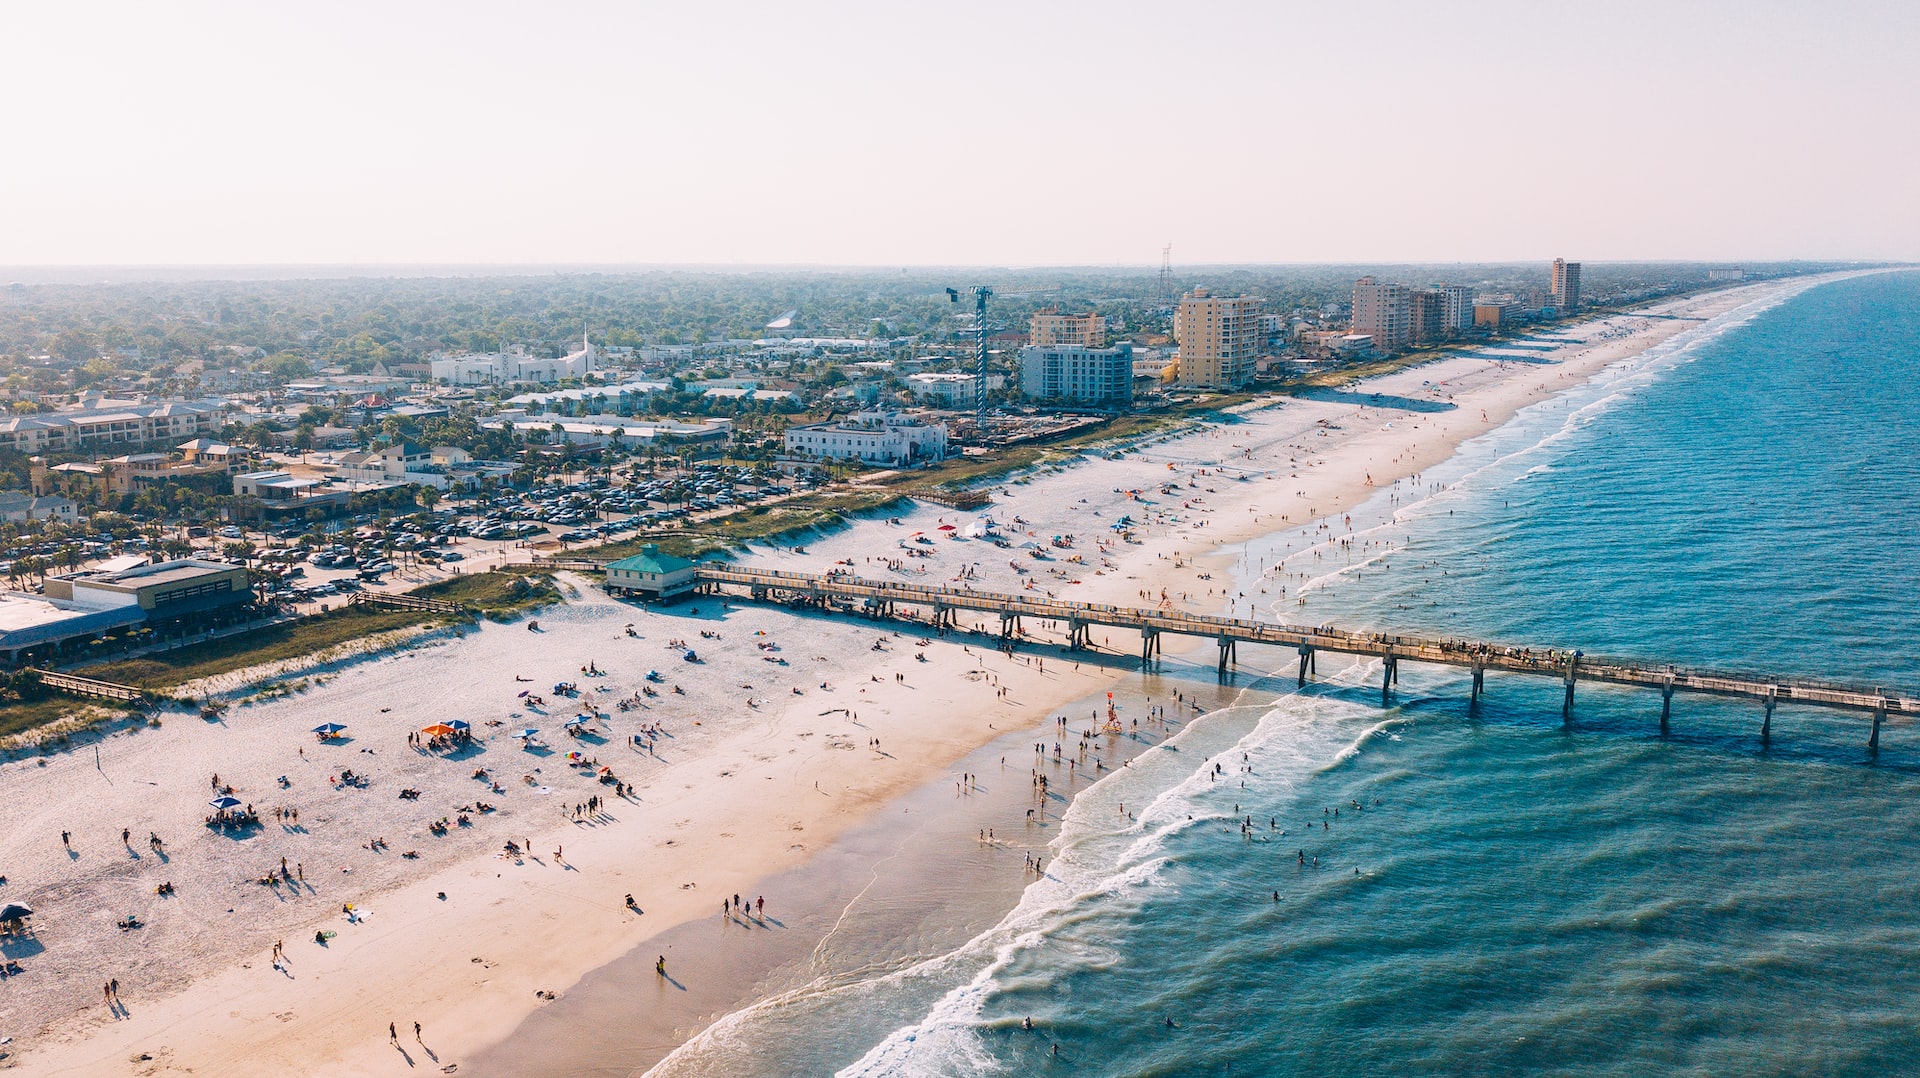 An aerial shot of the pier and people at Jacksonville Beach.